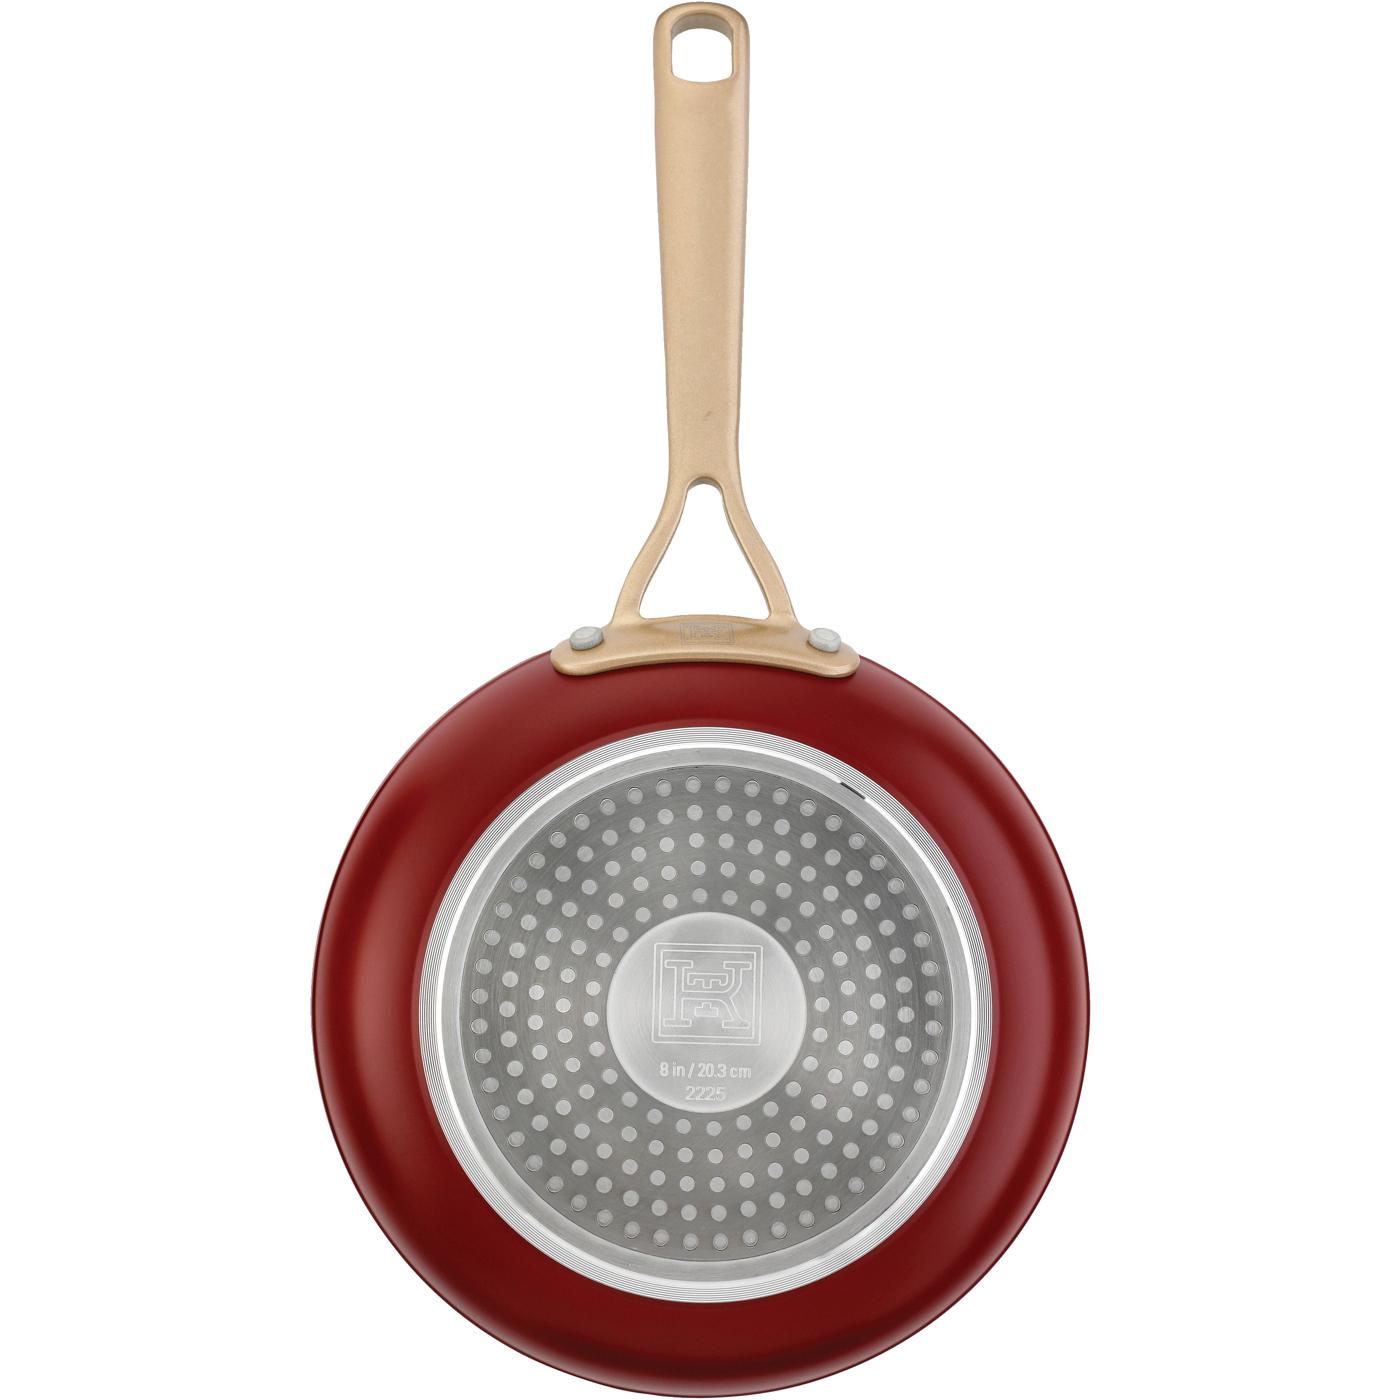 Kitchen & Table by H-E-B Non-Stick Fry Pan - Bordeaux Red; image 2 of 6